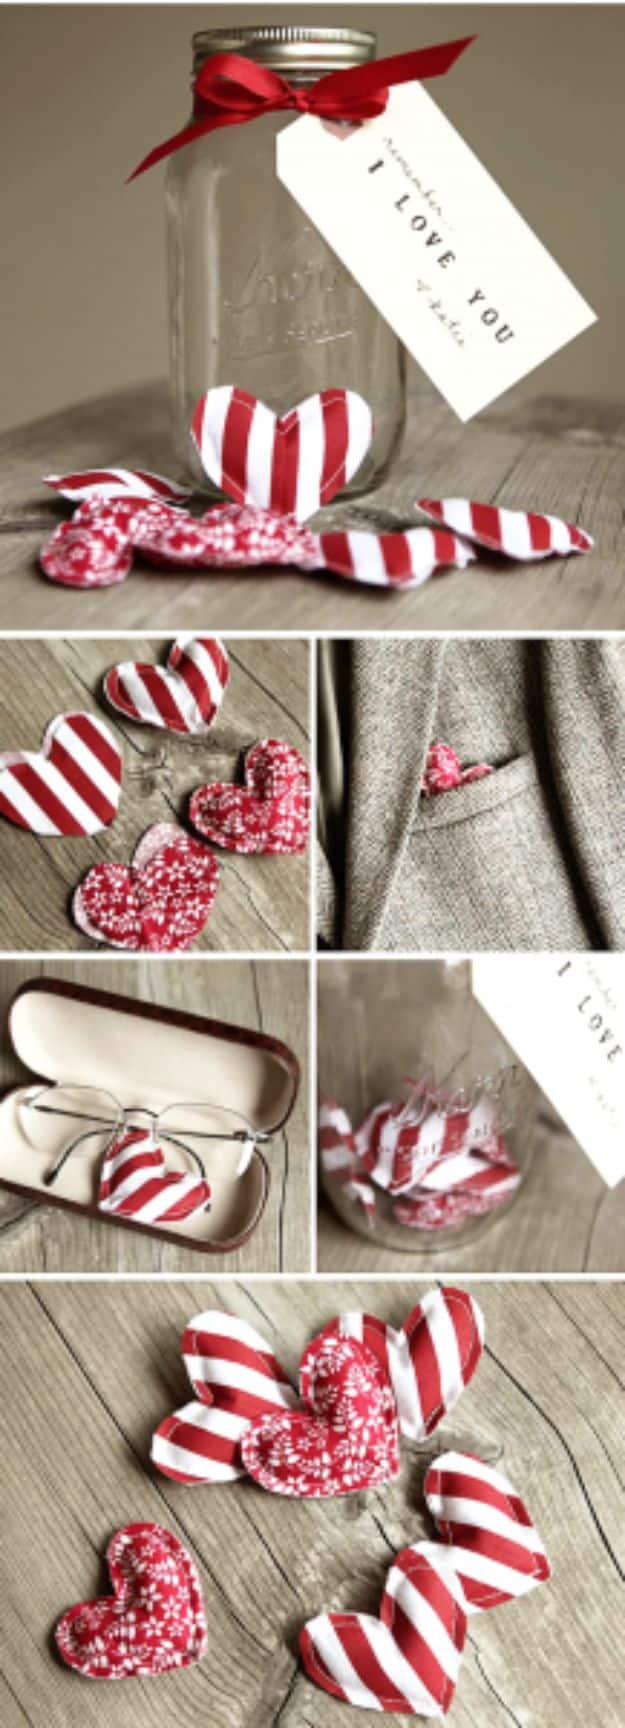 DIY Valentines Day Gifts for Her - Remember I Love You - Cool and Easy Things To Make for Your Wife, Girlfriend, Fiance - Creative and Cheap Do It Yourself Projects to Give Your Girl - Ladies Love These Ideas for Bath, Yard, Home and Kitchen, Outdoors - Make, Don't Buy Your Valentine 